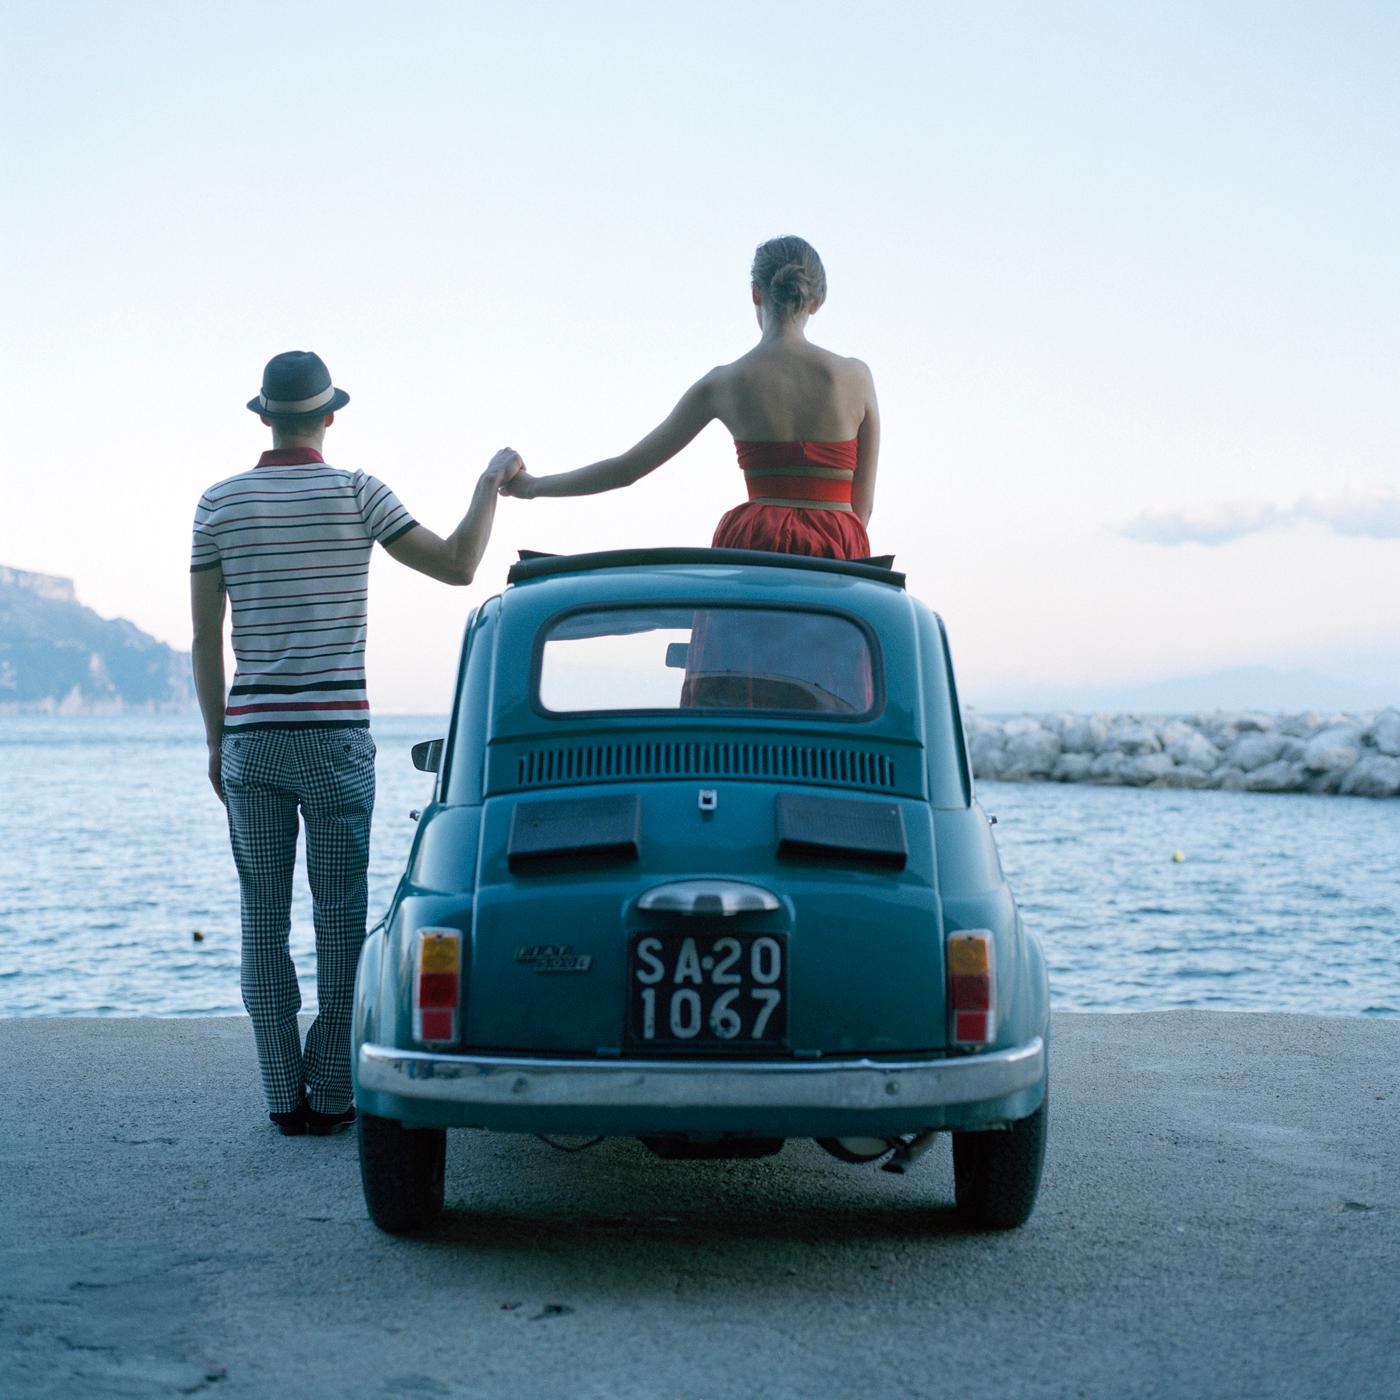 Rodney Smith Figurative Photograph - Saori and Mossimo Holding Hands- 20 x 20 inches